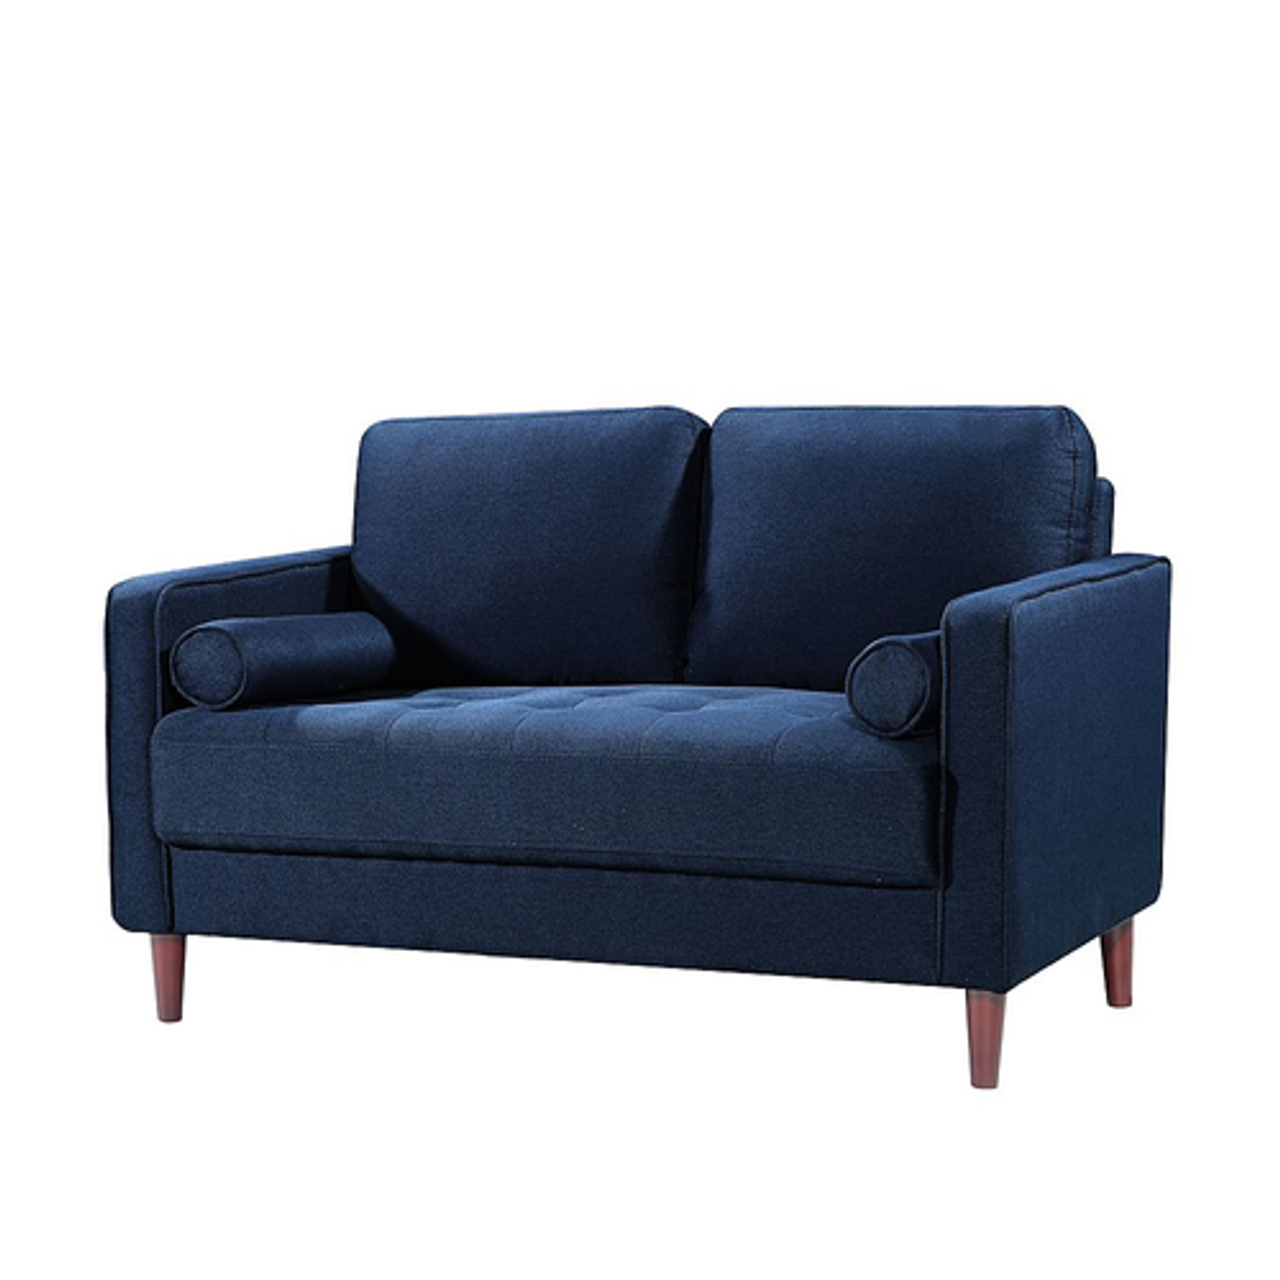 Lifestyle Solutions - Langford Loveseat with Upholstered Fabric and Eucalyptus Wood Frame - Navy Blue